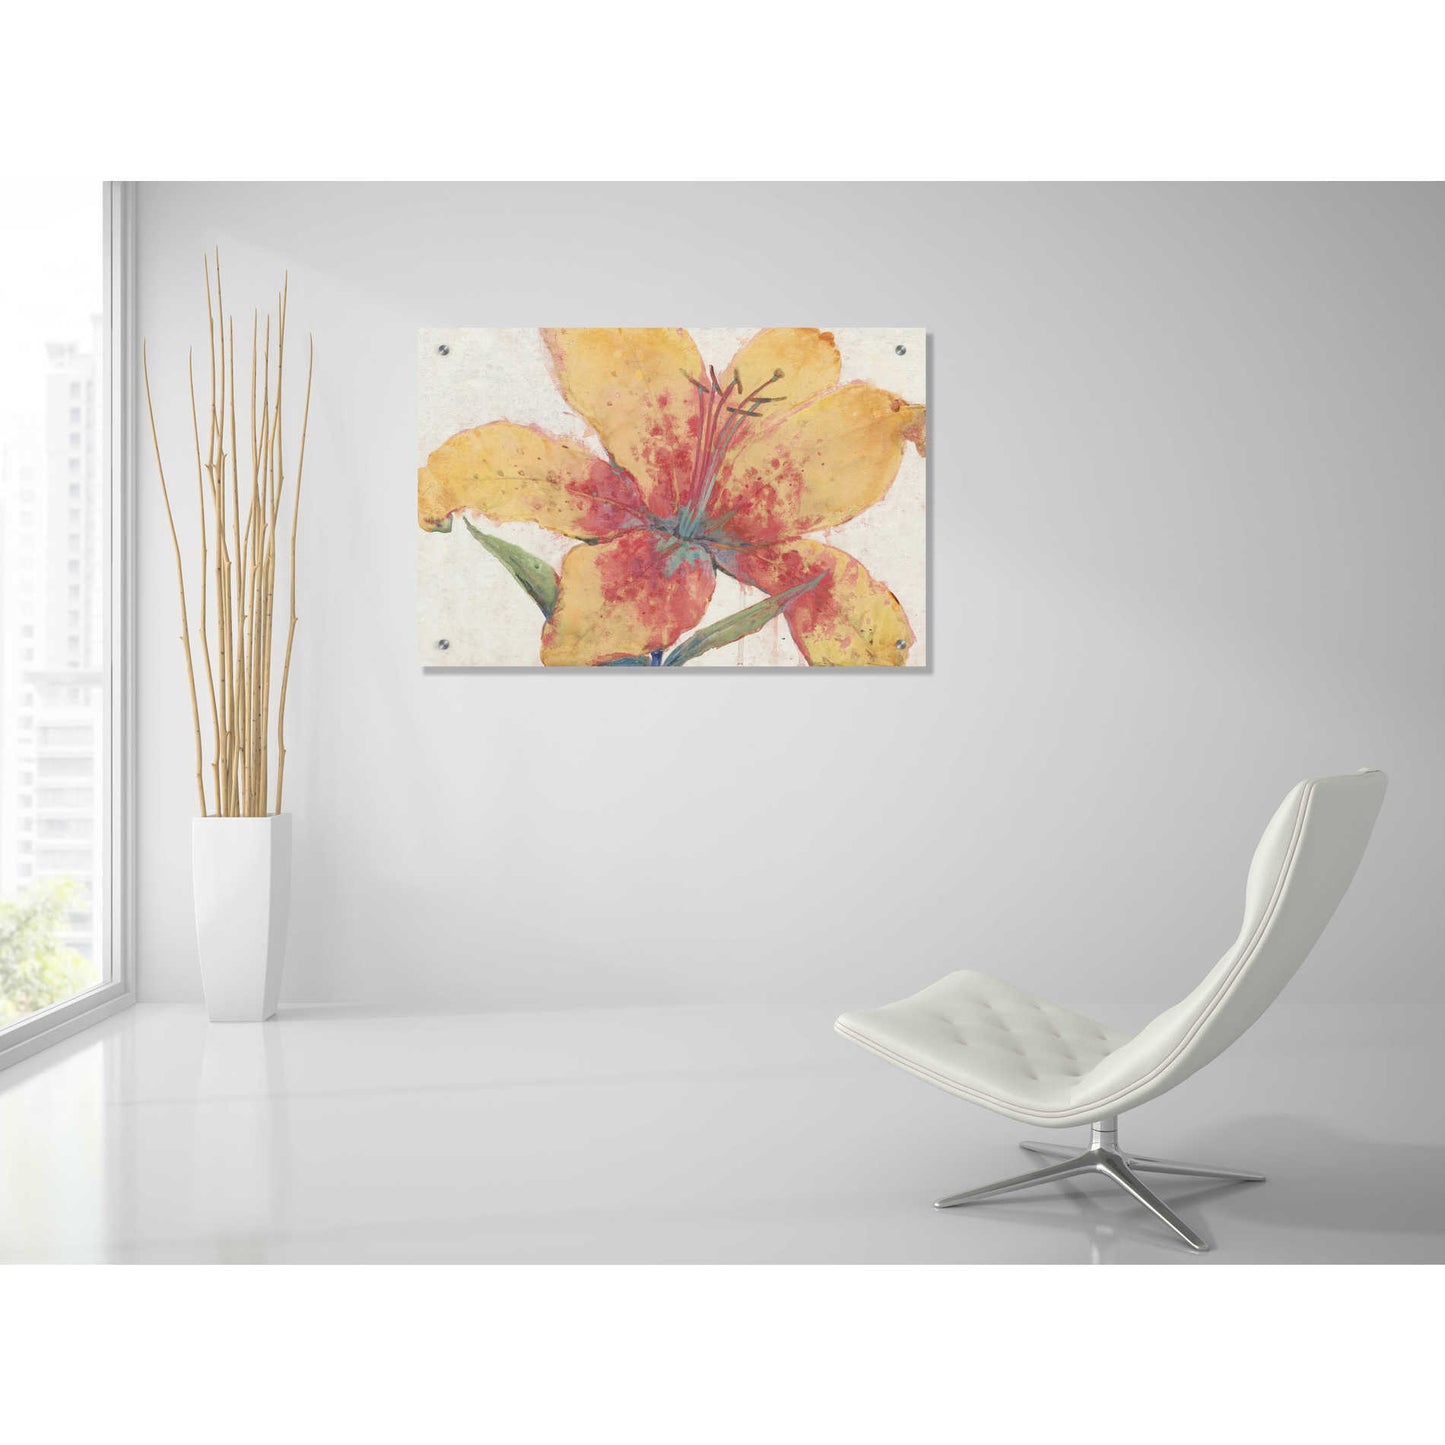 Epic Art 'Blooming Lily' by Tim O'Toole, Acrylic Glass Wall Art,36x24